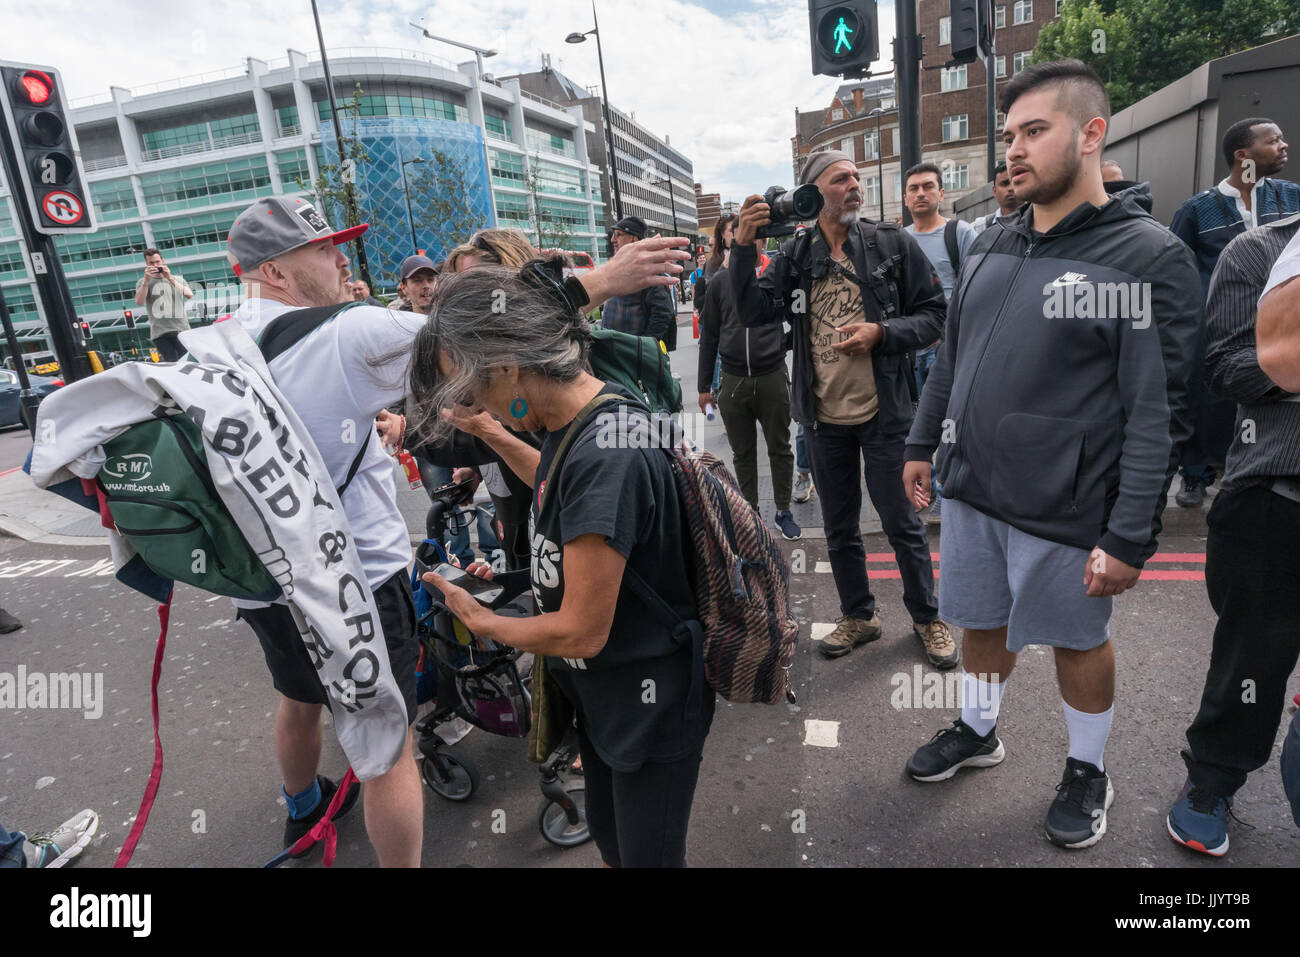 London, UK. 21st July 2017. A driver comes to argue with DPAC as they end their week of action during the London Para Athletics World Championships by blocking one carriageway of the Euston Road at Warren St for around ten minutes. They tell him that thousands of people are dyring and that everyone needs ot take action to stop it, even if it does hold up traffic for a few mintues. Credit: Peter Marshall/Alamy Live News Stock Photo